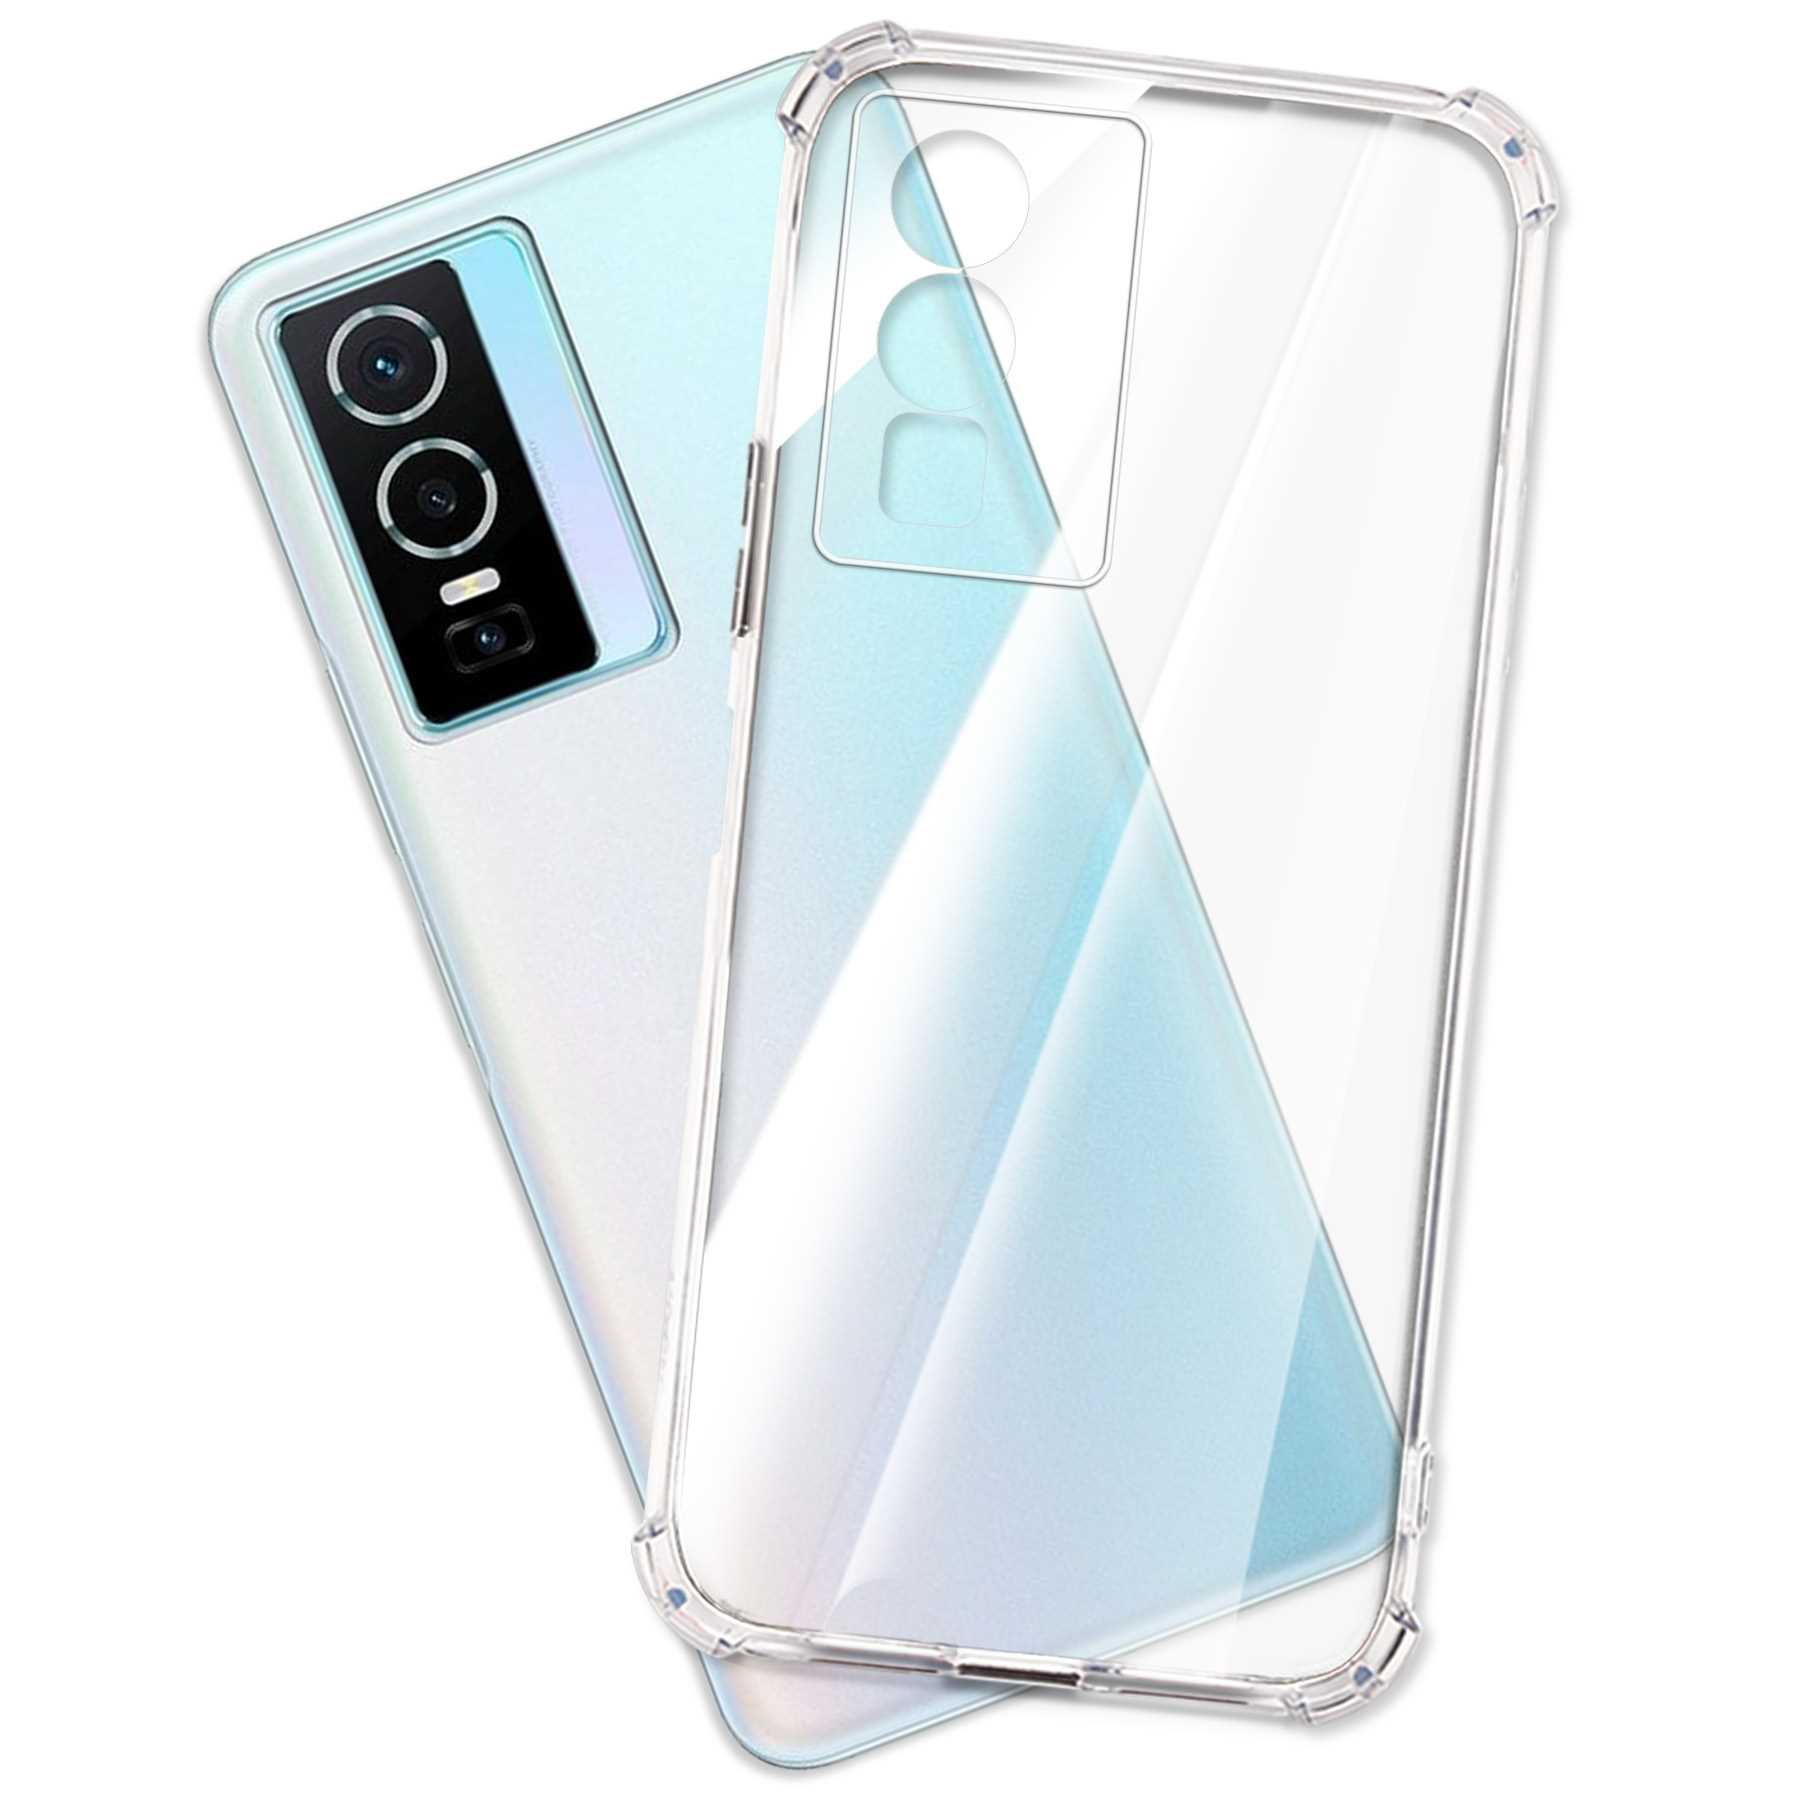 Armor Case, 5G, vivo, MTB Transparent Backcover, ENERGY Clear Y76 MORE